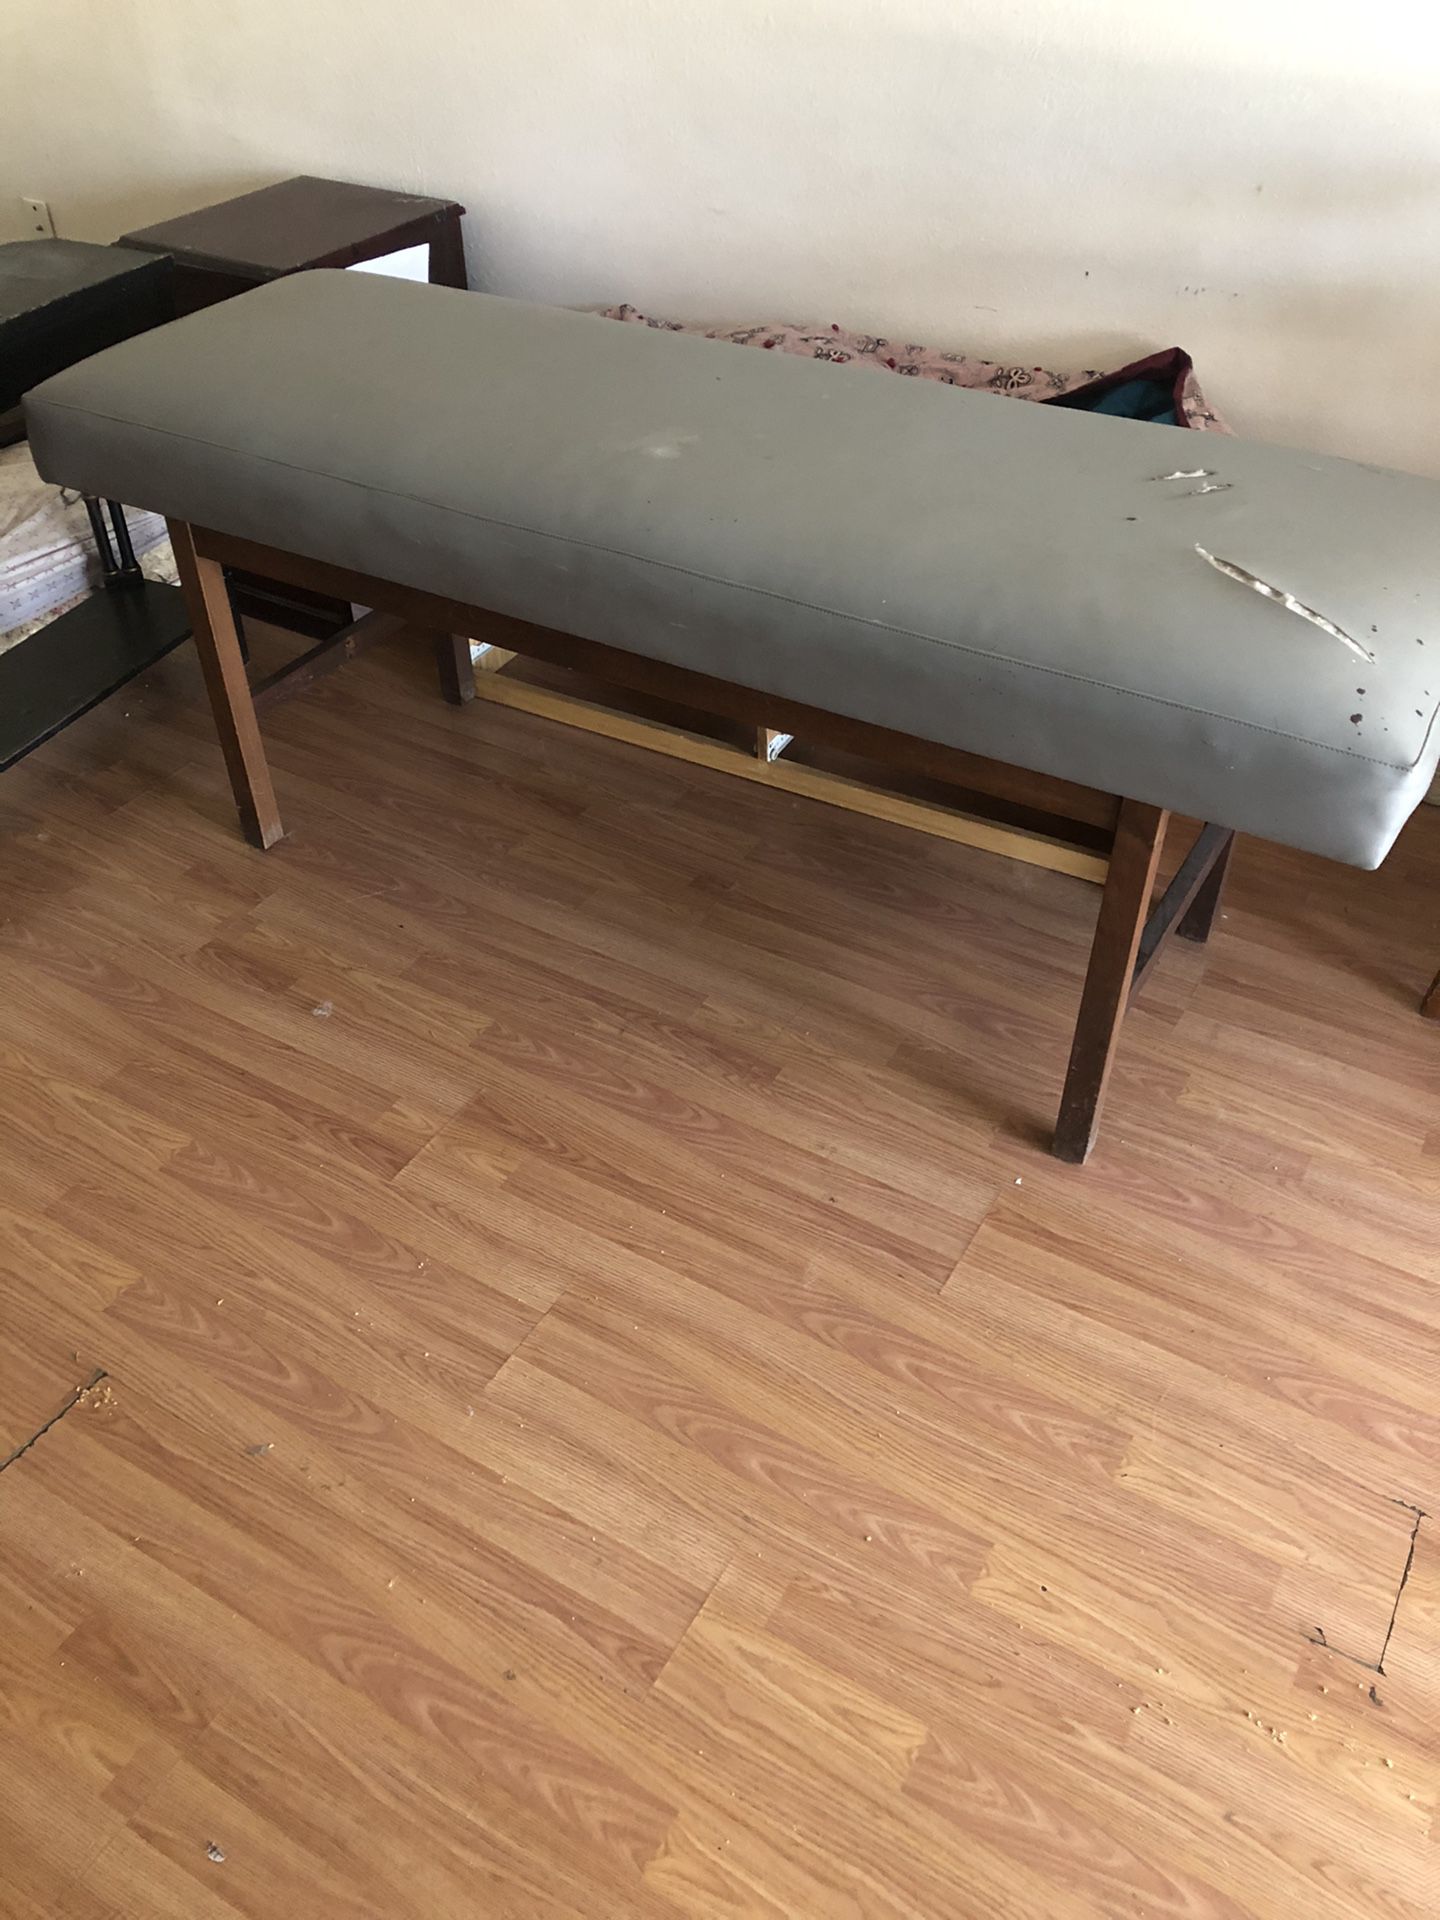 PRICED TO SELL FAST!!! Padded massage / traction exam table. Must be purchased no later than 3 pm 7/7/2020 !!